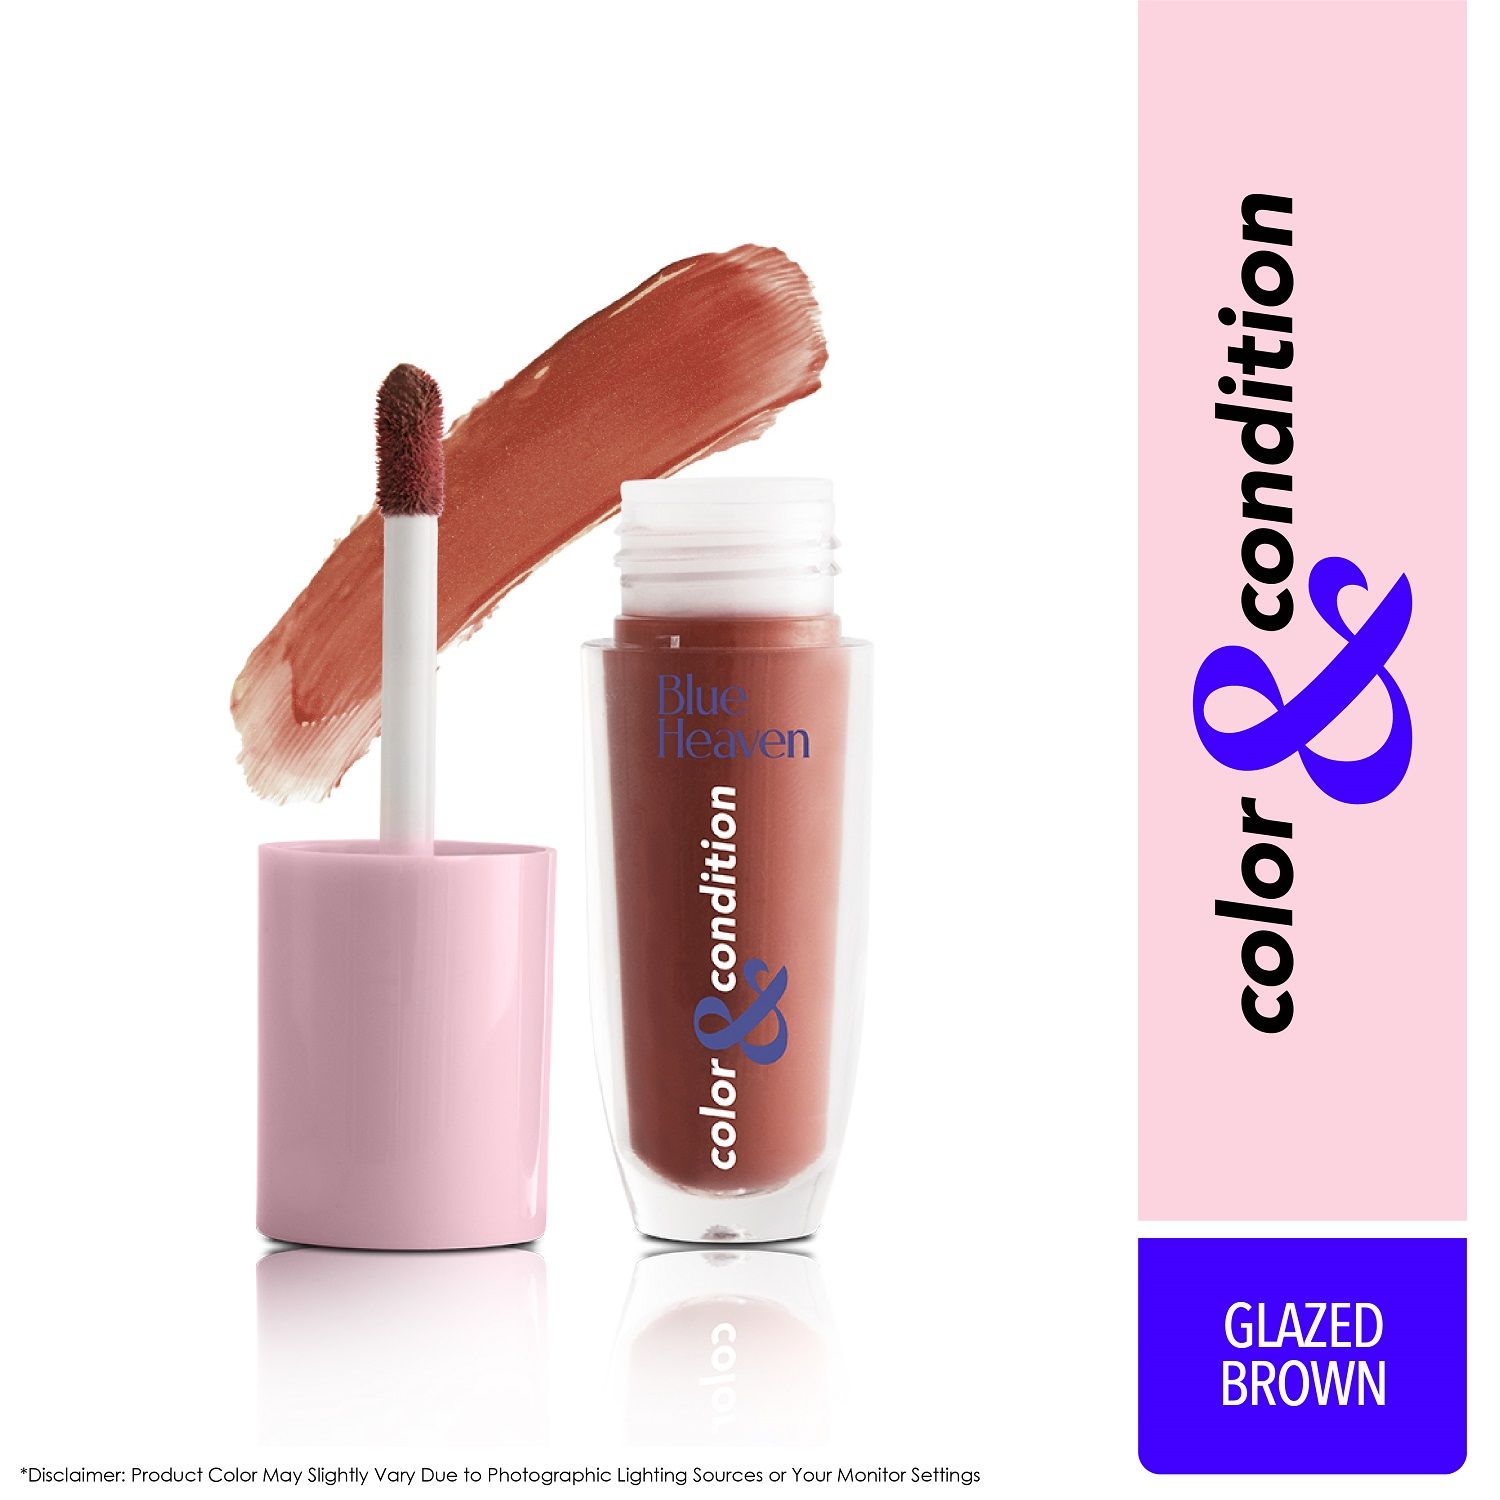 Blue Heaven Color & Condition Tinted Conditioning Lip Oil | 2-in-1 Liquid Lipstick & Lip Balm, Infused with Exotic Oils for Long Lasting Hydration, Glazed Brown